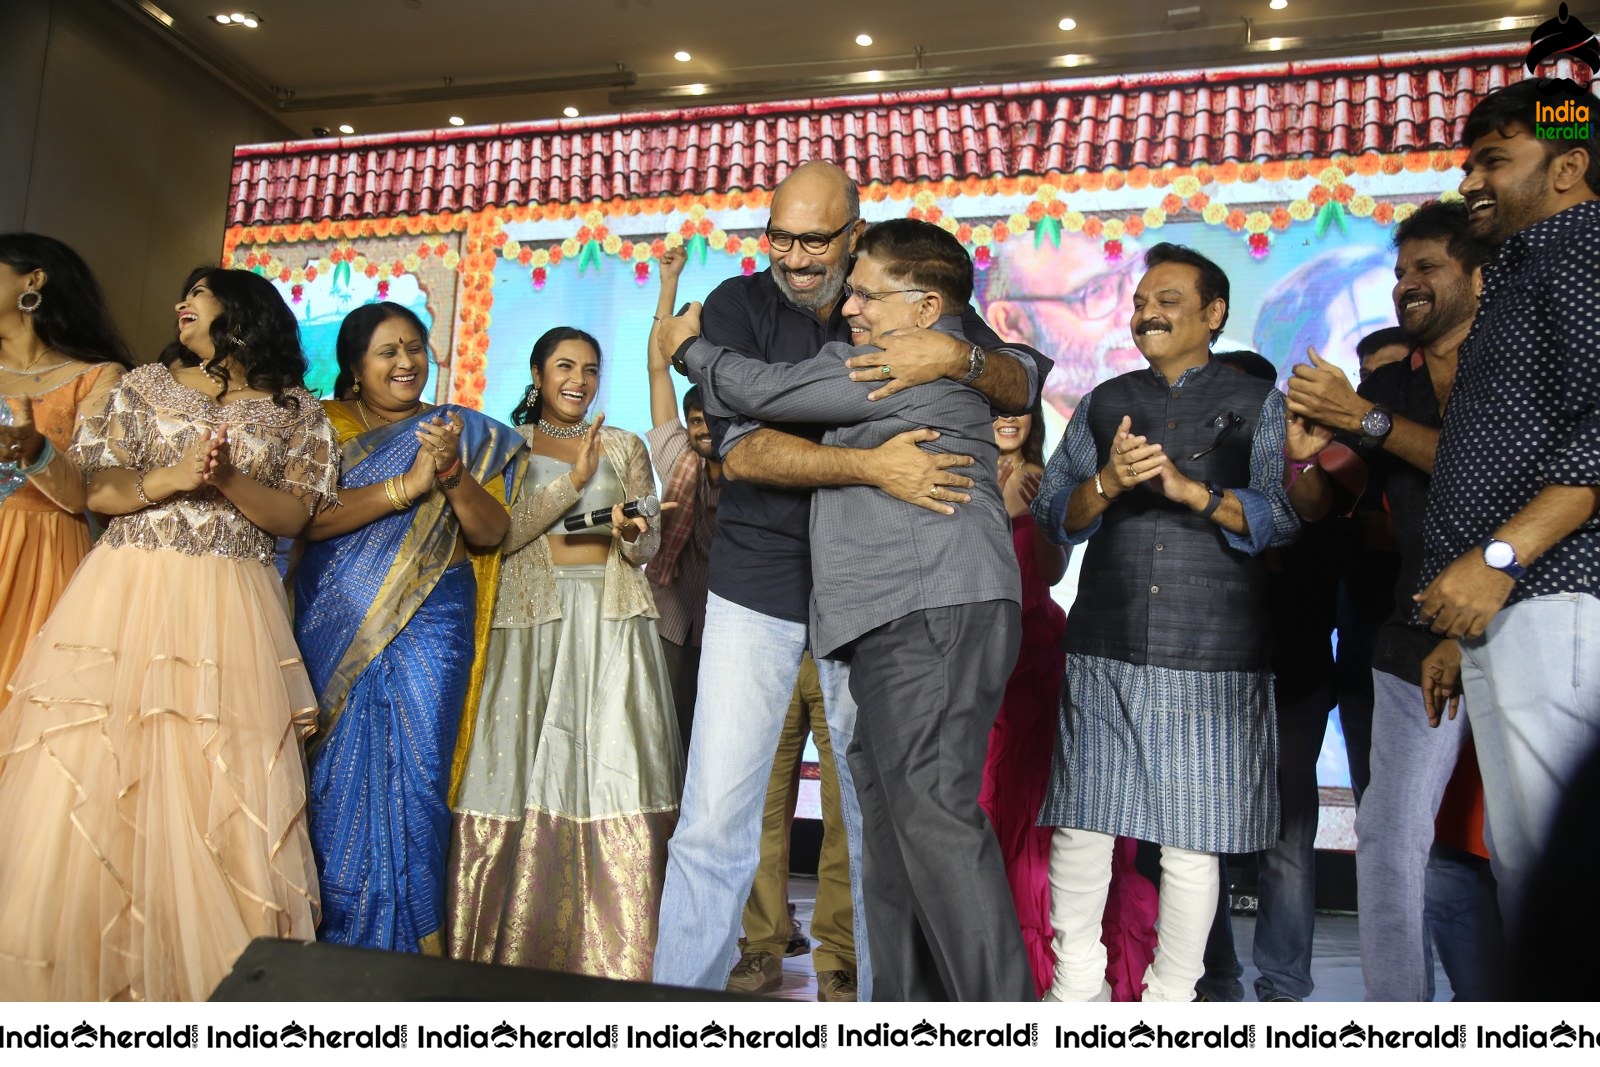 Actors of all ages from Prati Roju Pandage Team Dance On the Stage joyfully Set 2